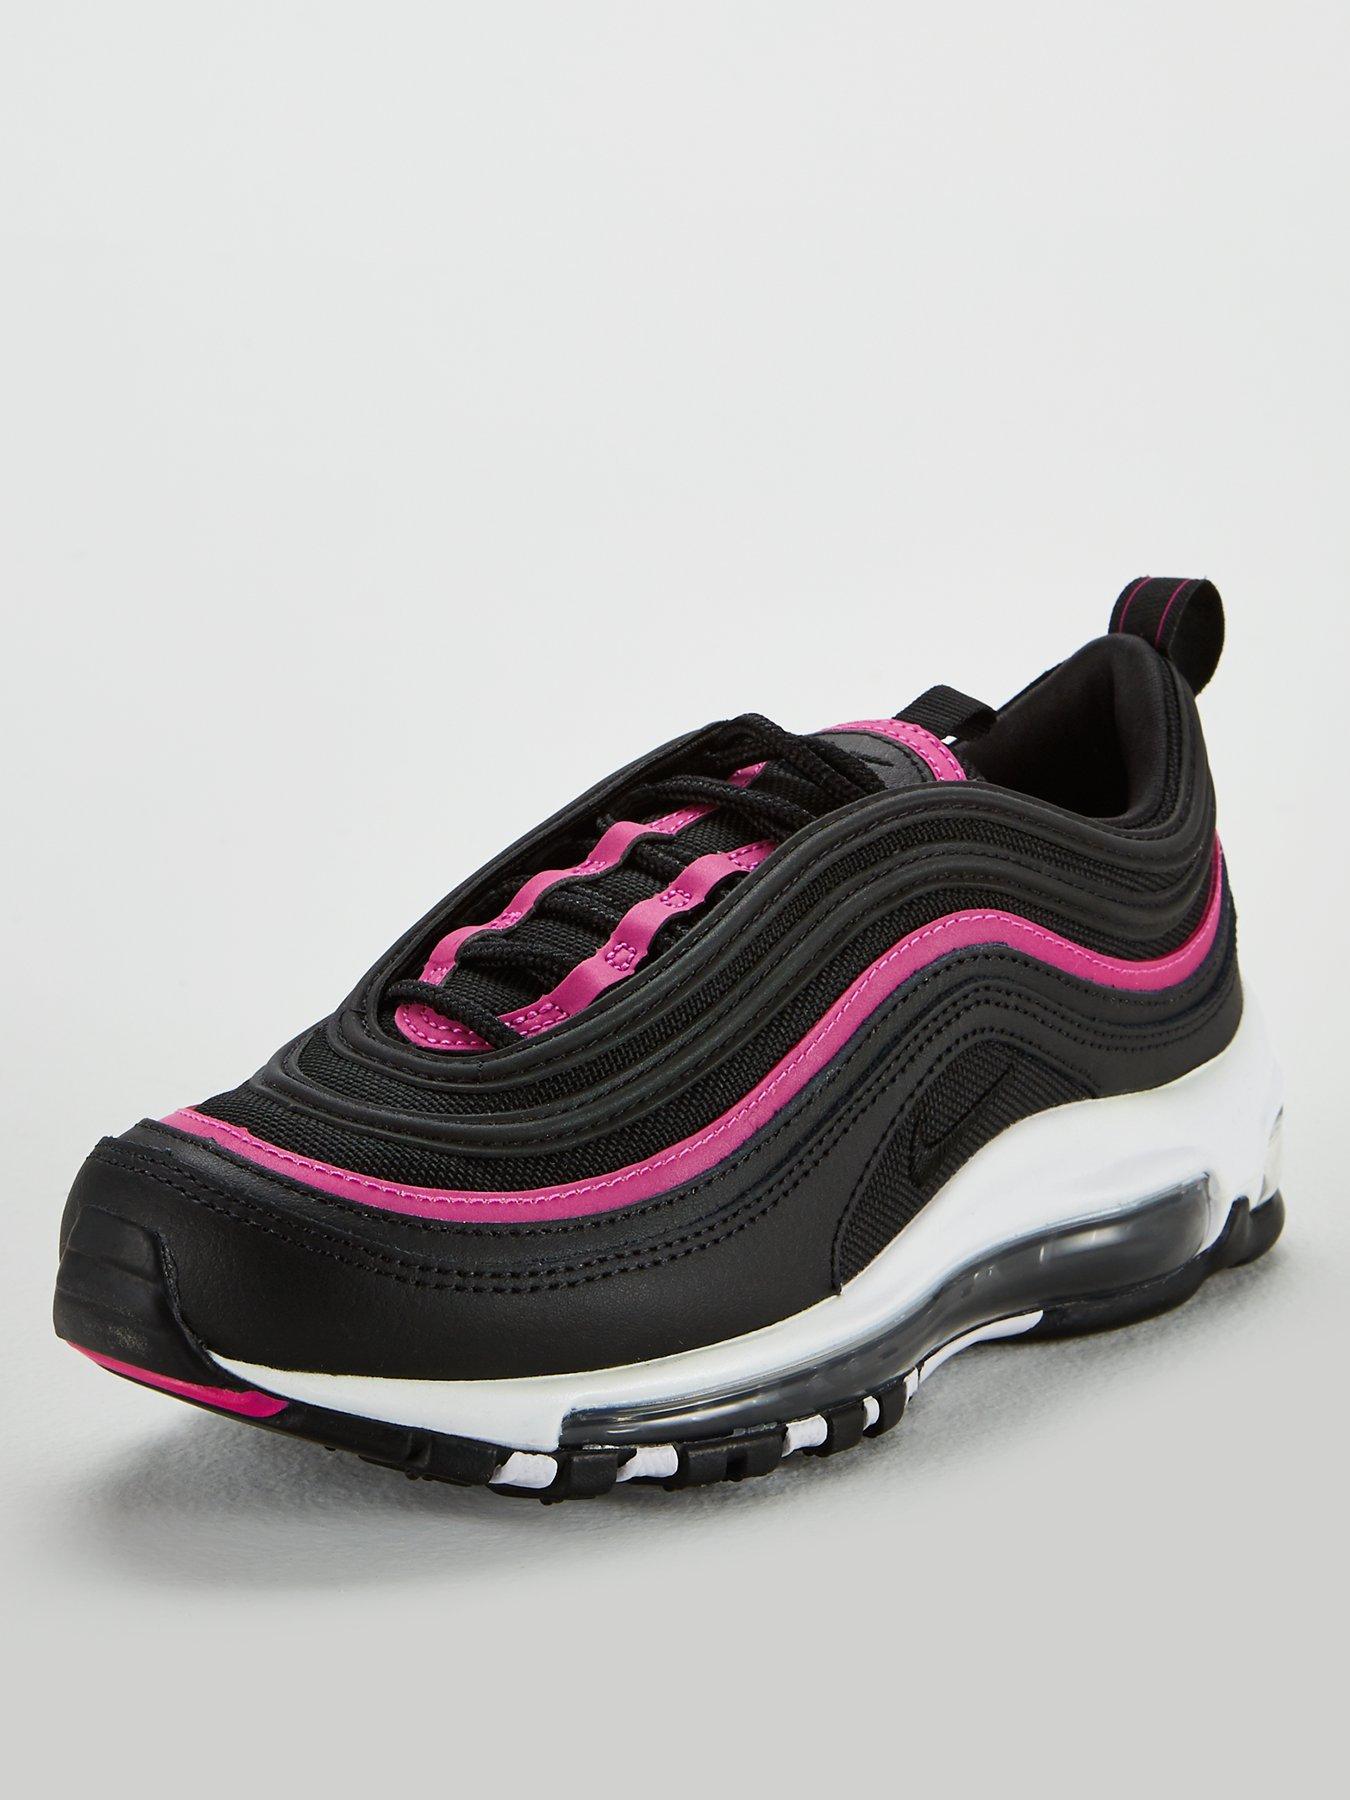 black and pink 97s